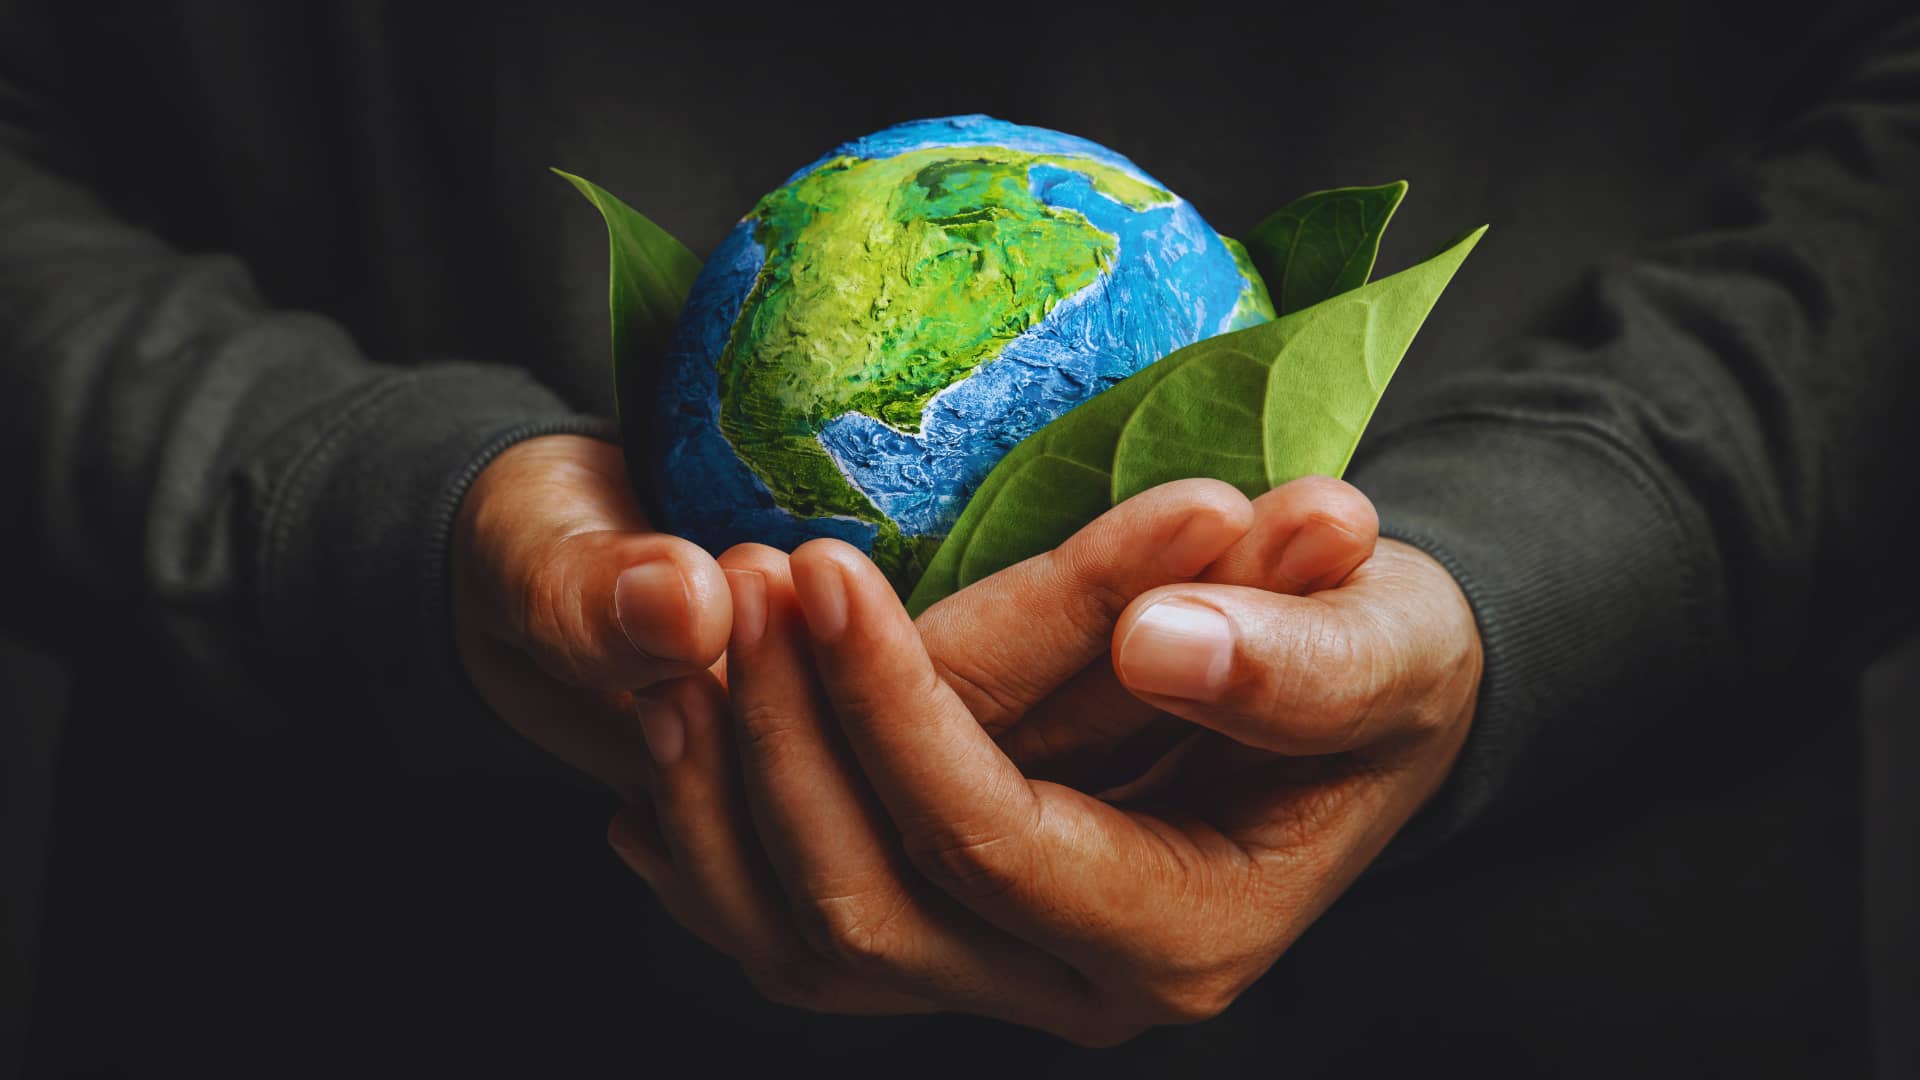 Hands Holding Globe/Earth Wrapped in Leaves